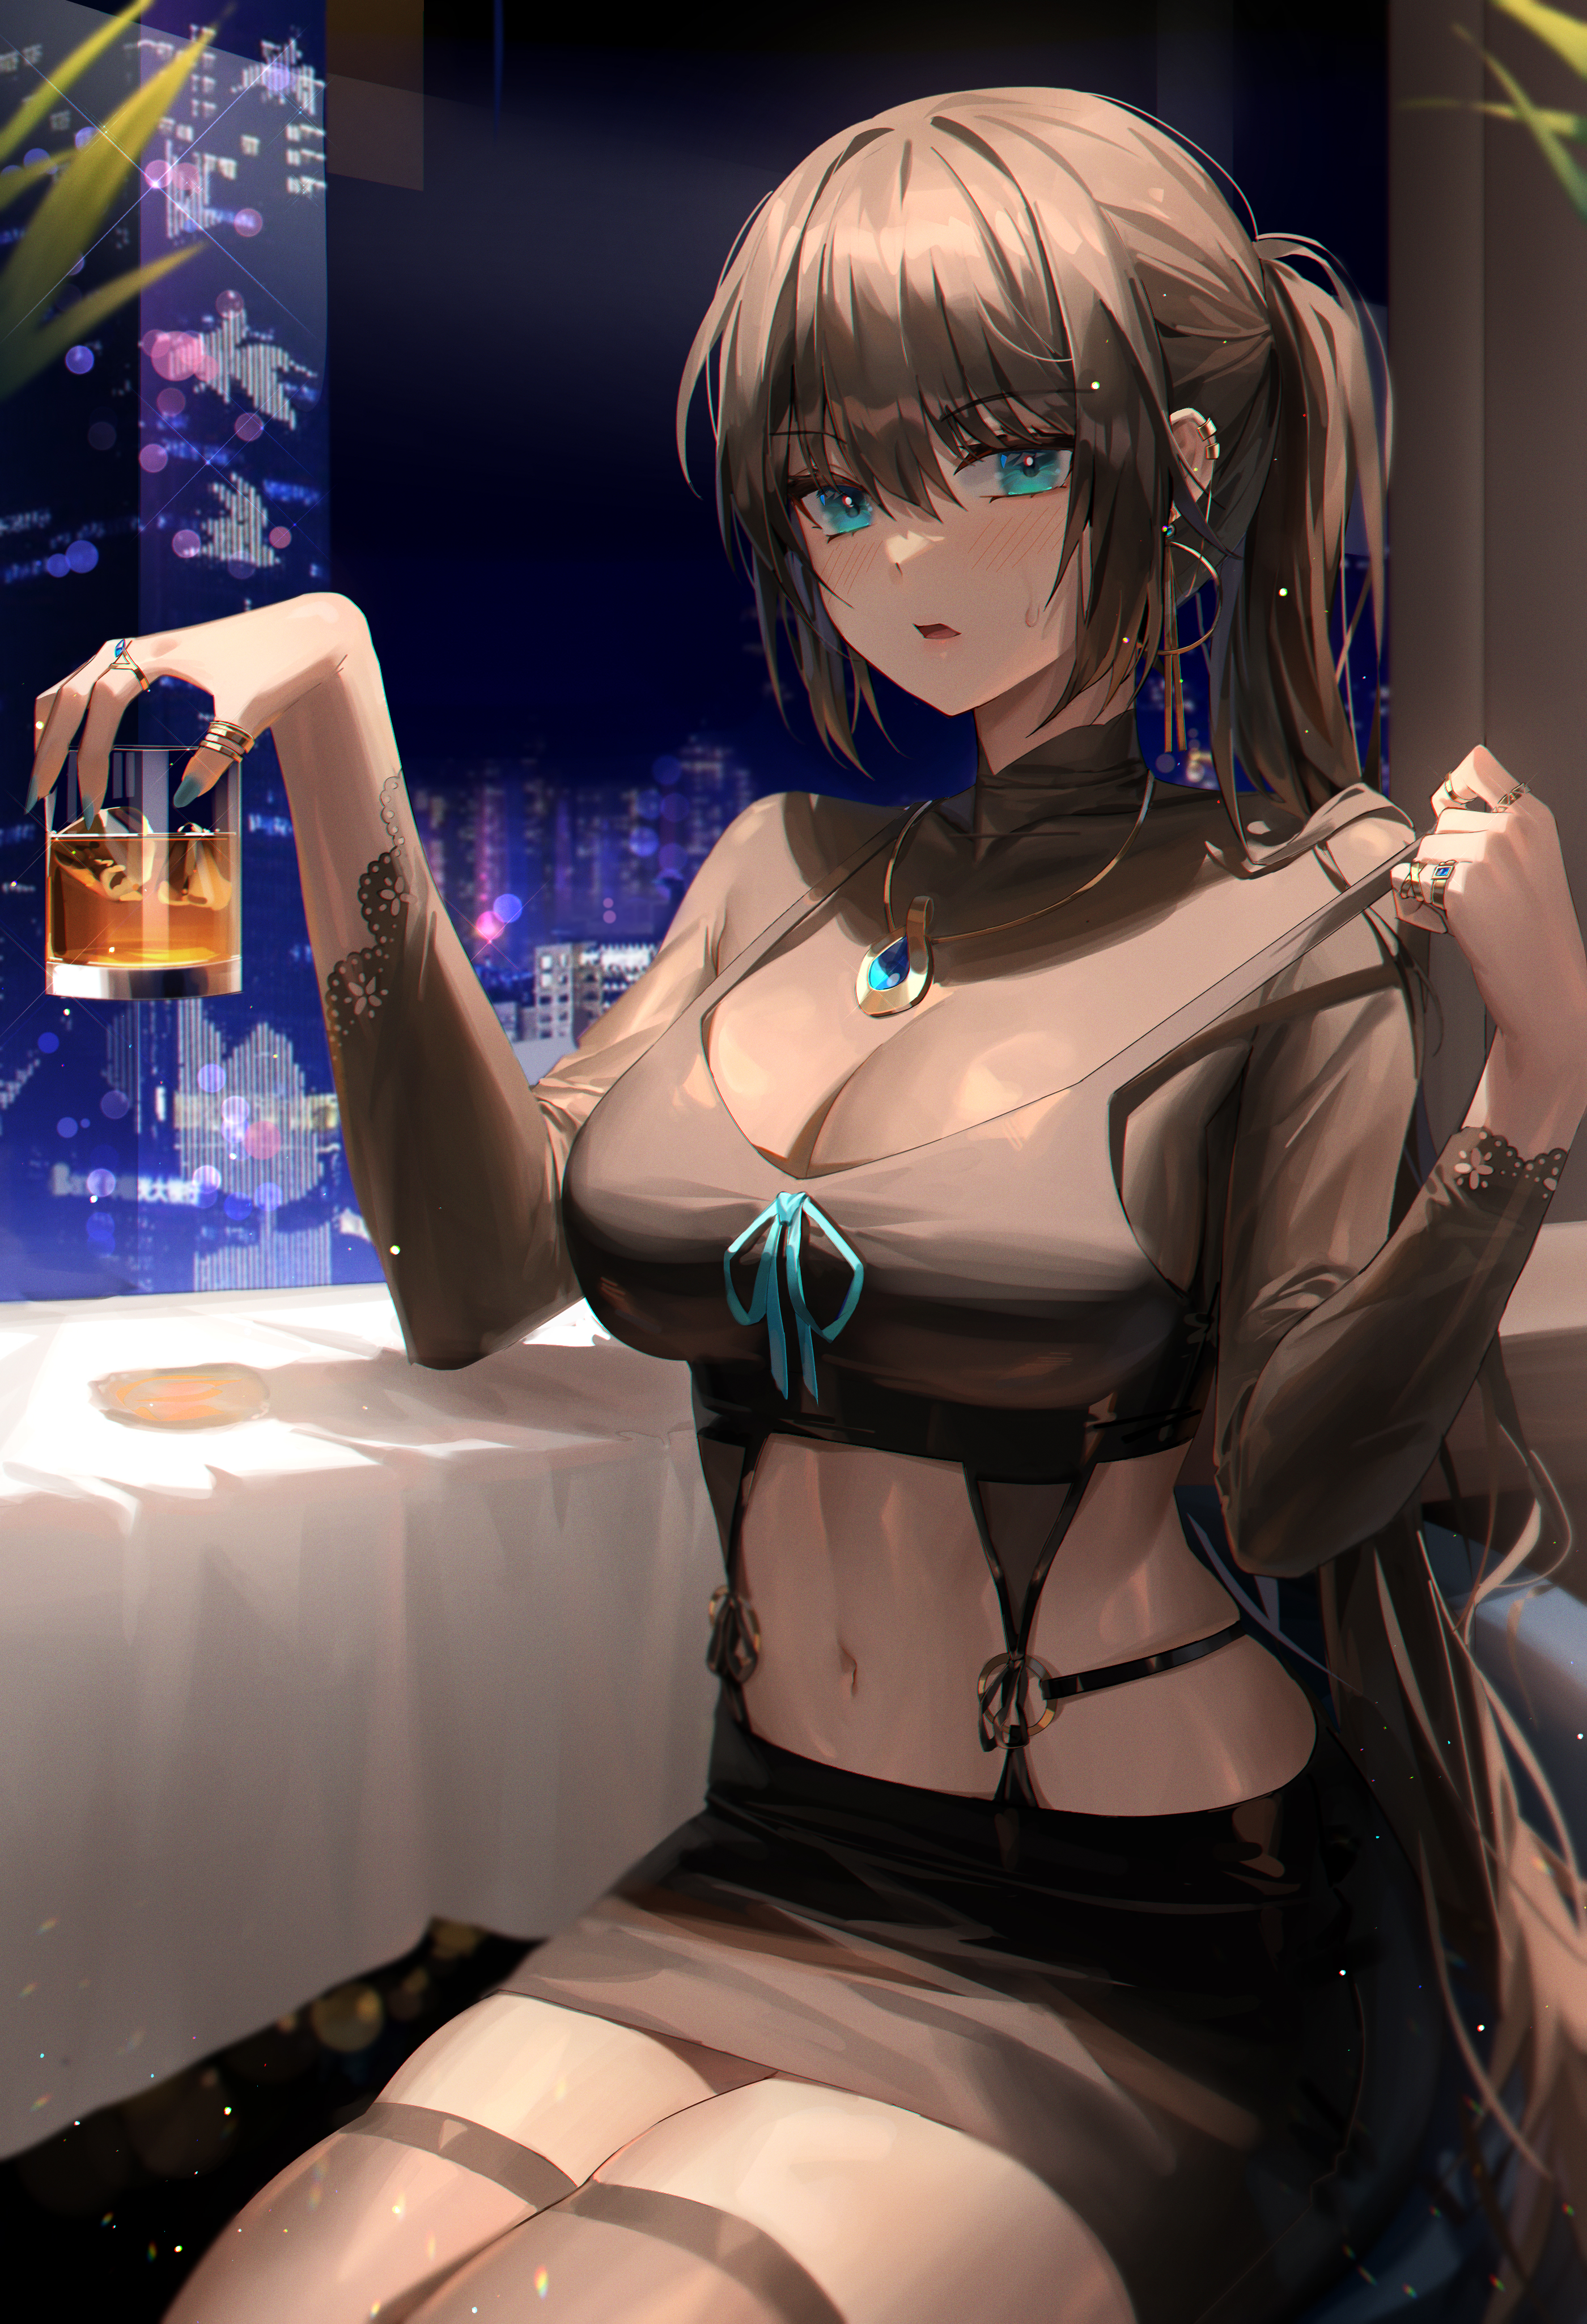 Anime 2800x4100 anime Minttchocok anime girls blue eyes cleavage big boobs belly stockings drink alcohol